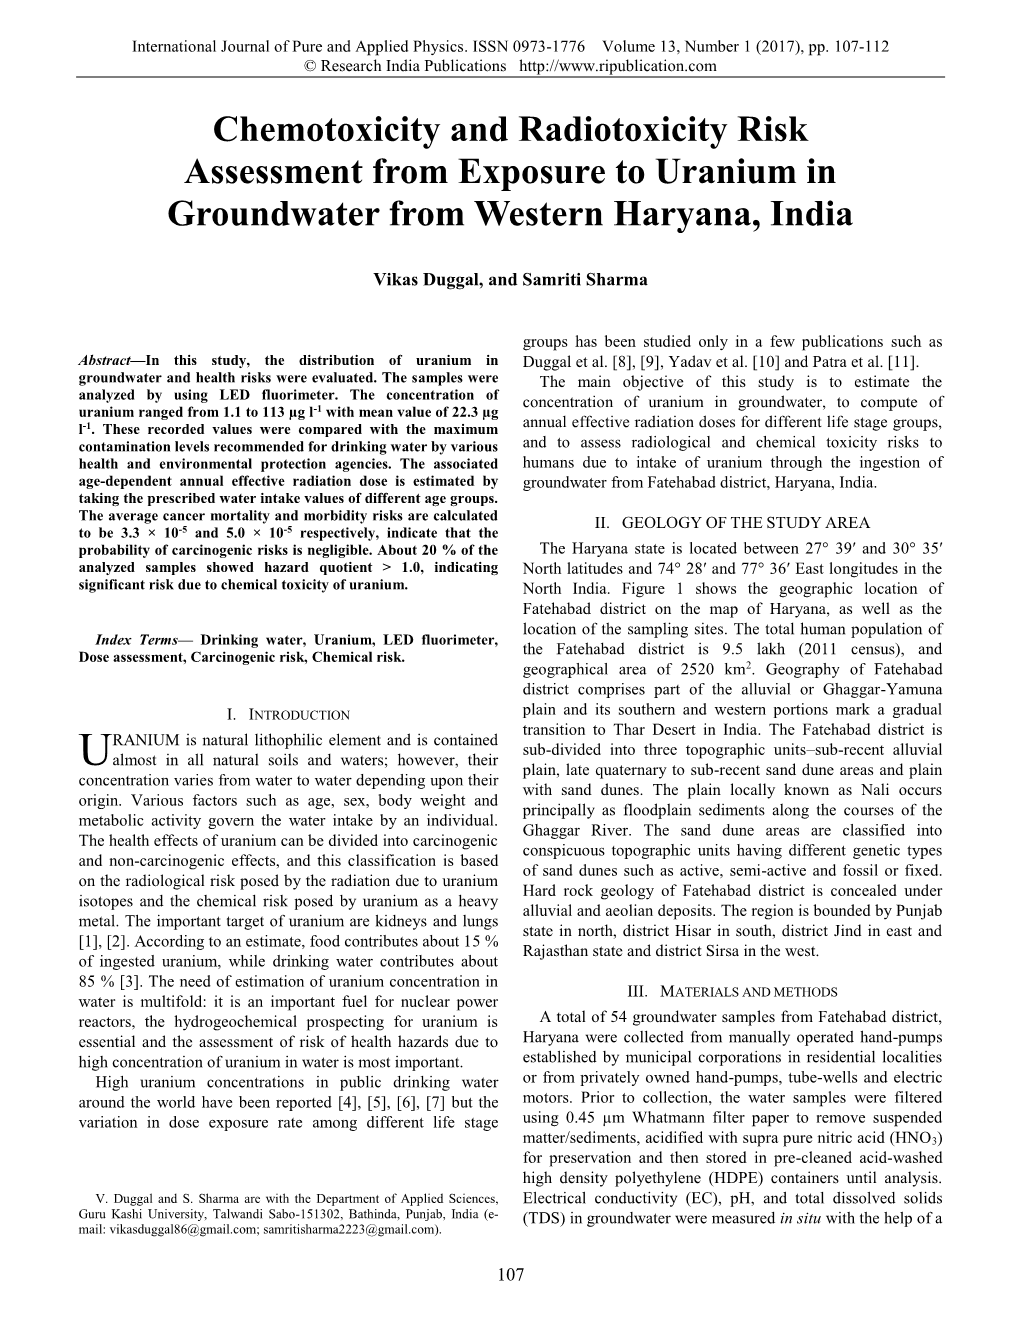 Chemotoxicity and Radiotoxicity Risk Assessment from Exposure to Uranium in Groundwater from Western Haryana, India